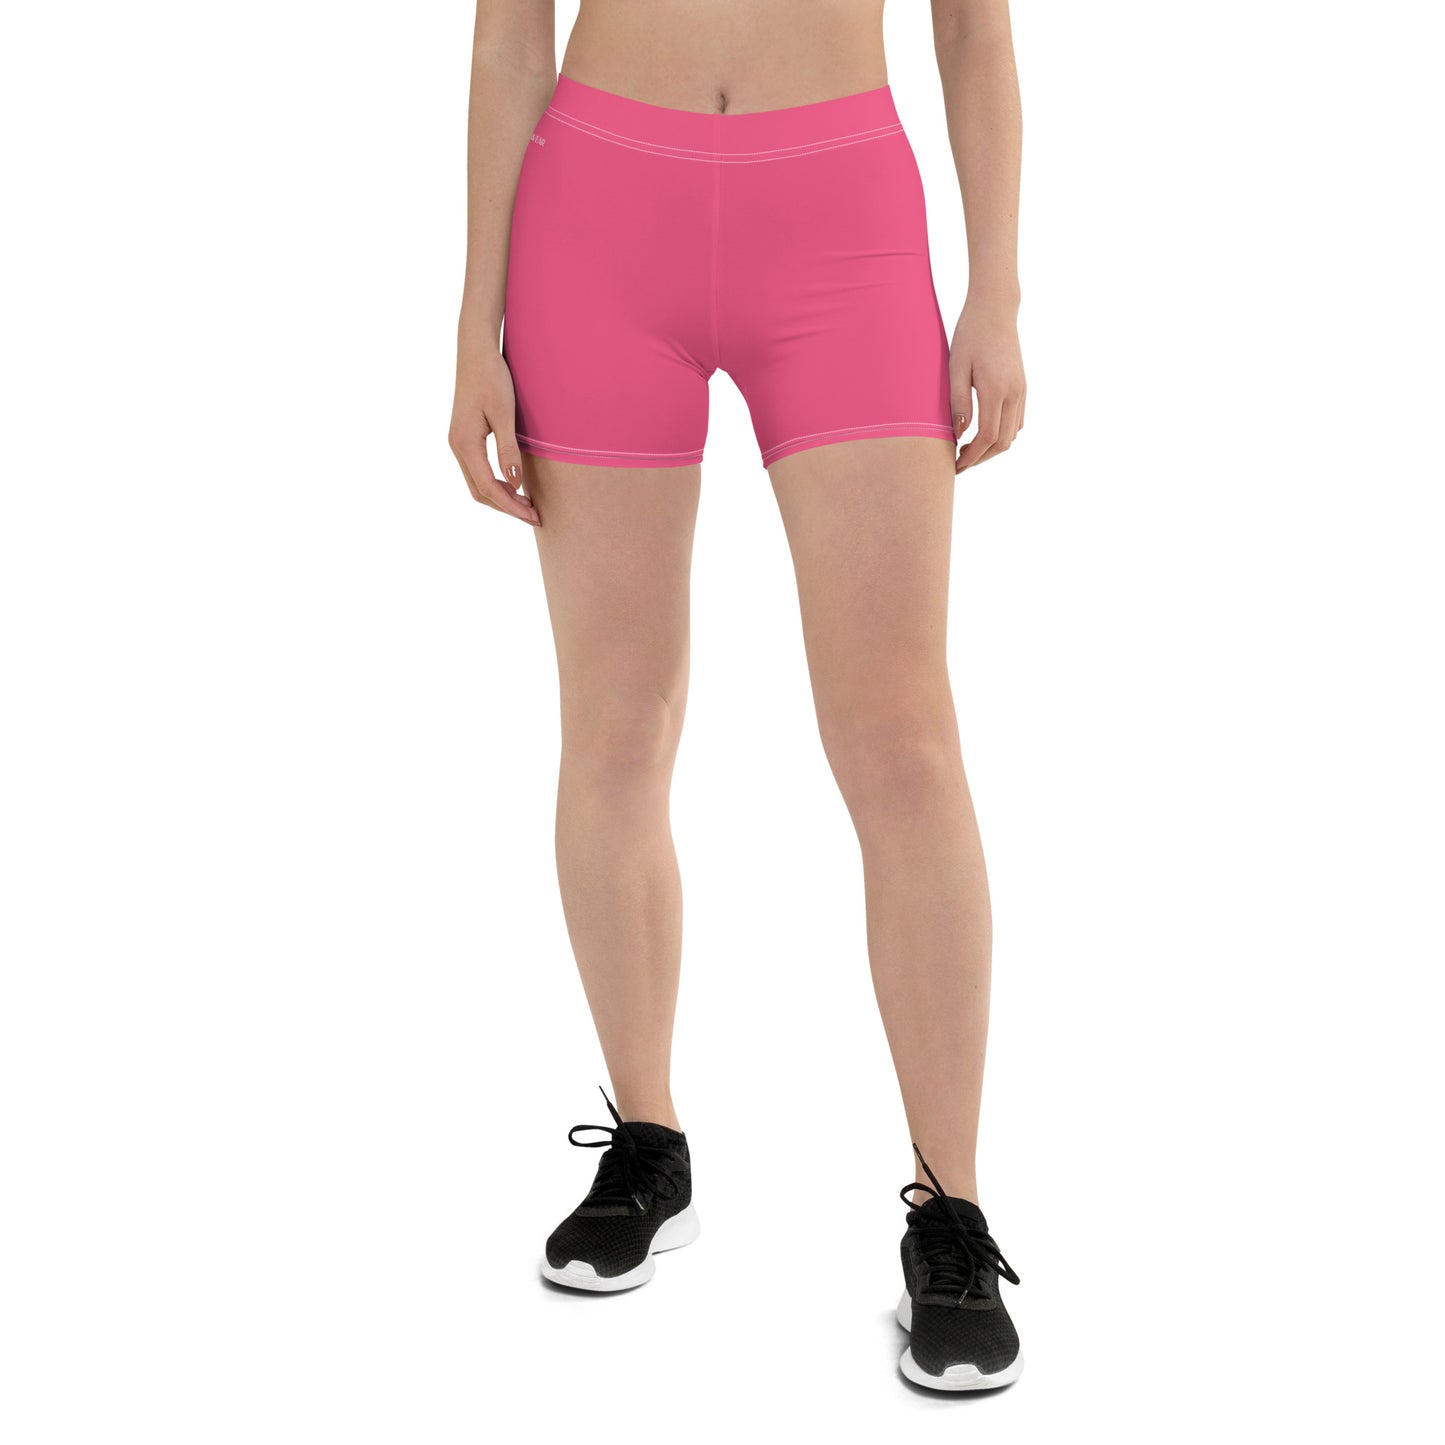 Humble Sportswear, women's Color Match activewear madison pink stretchy bike shorts